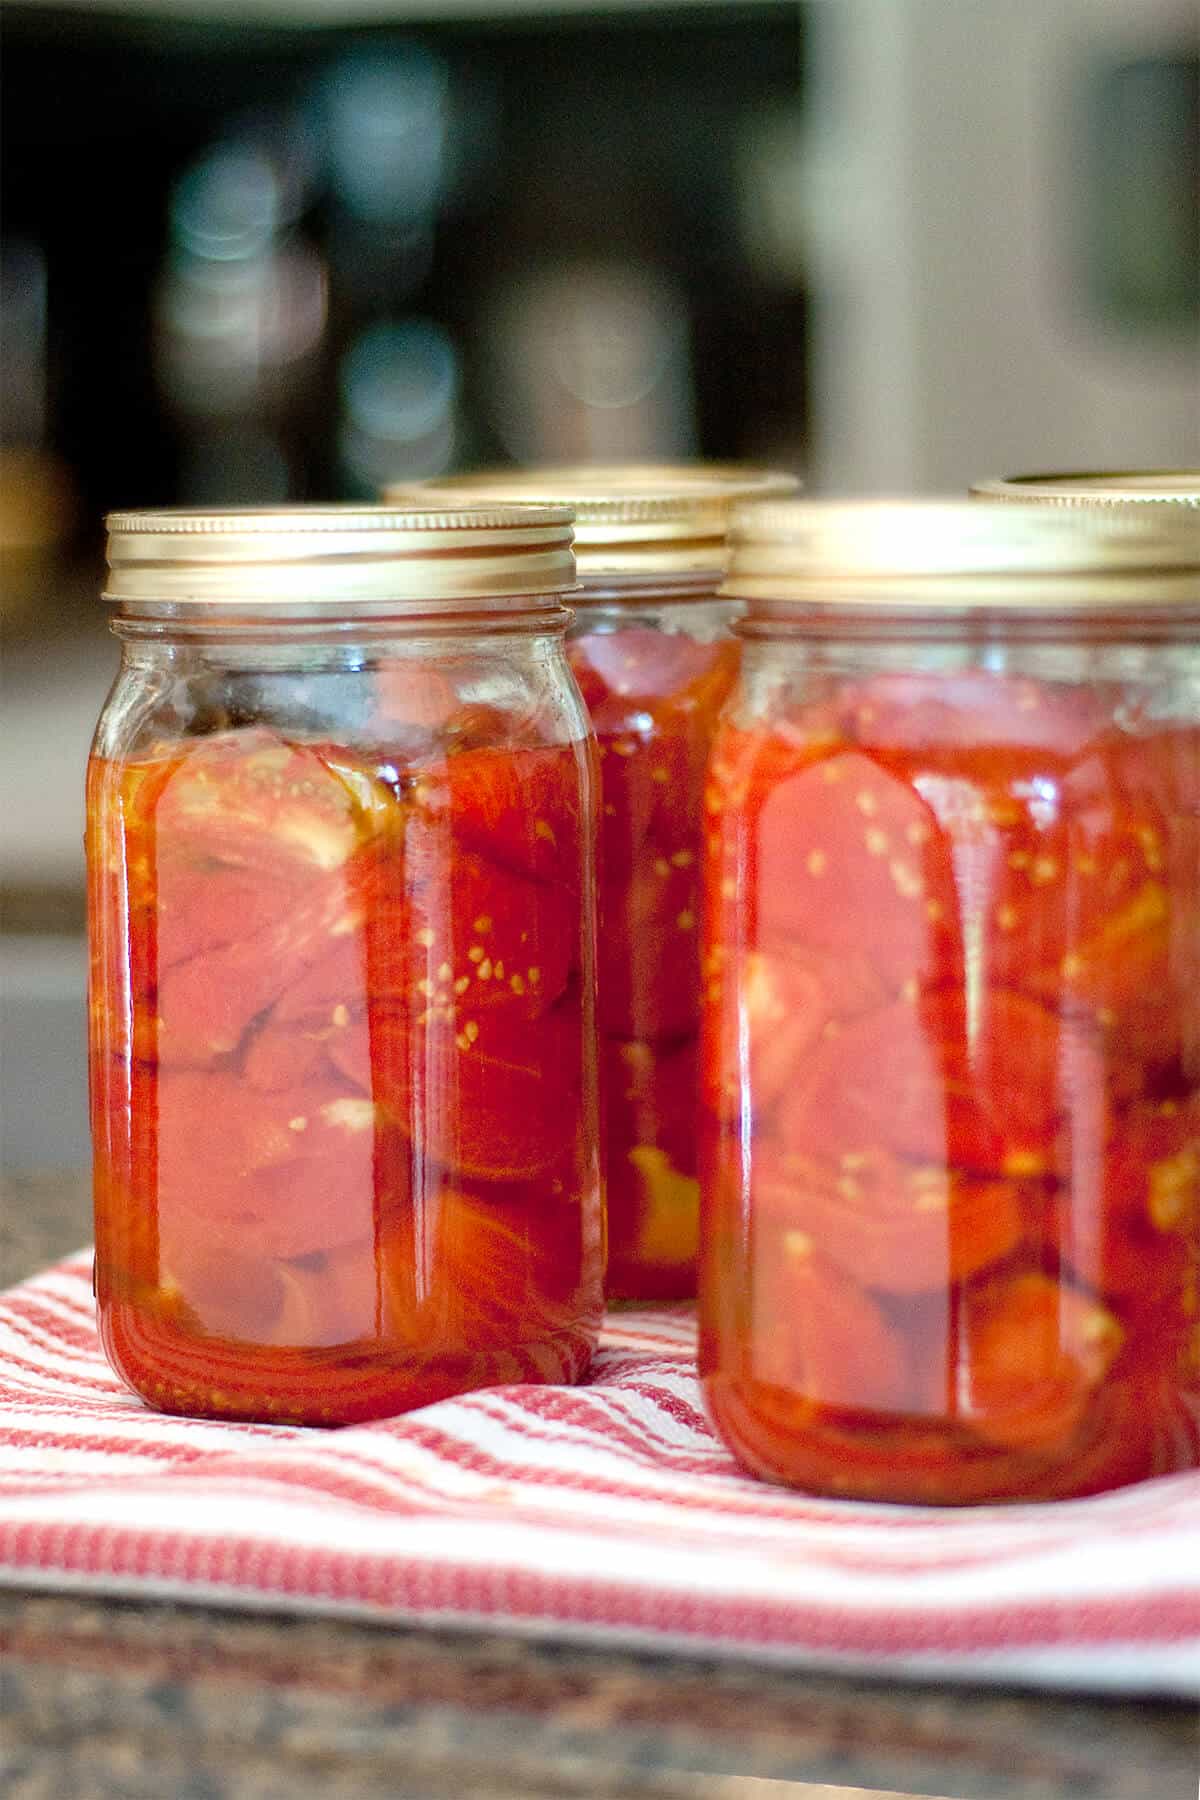 Jars of home canned tomatoes on a kitchen towel.